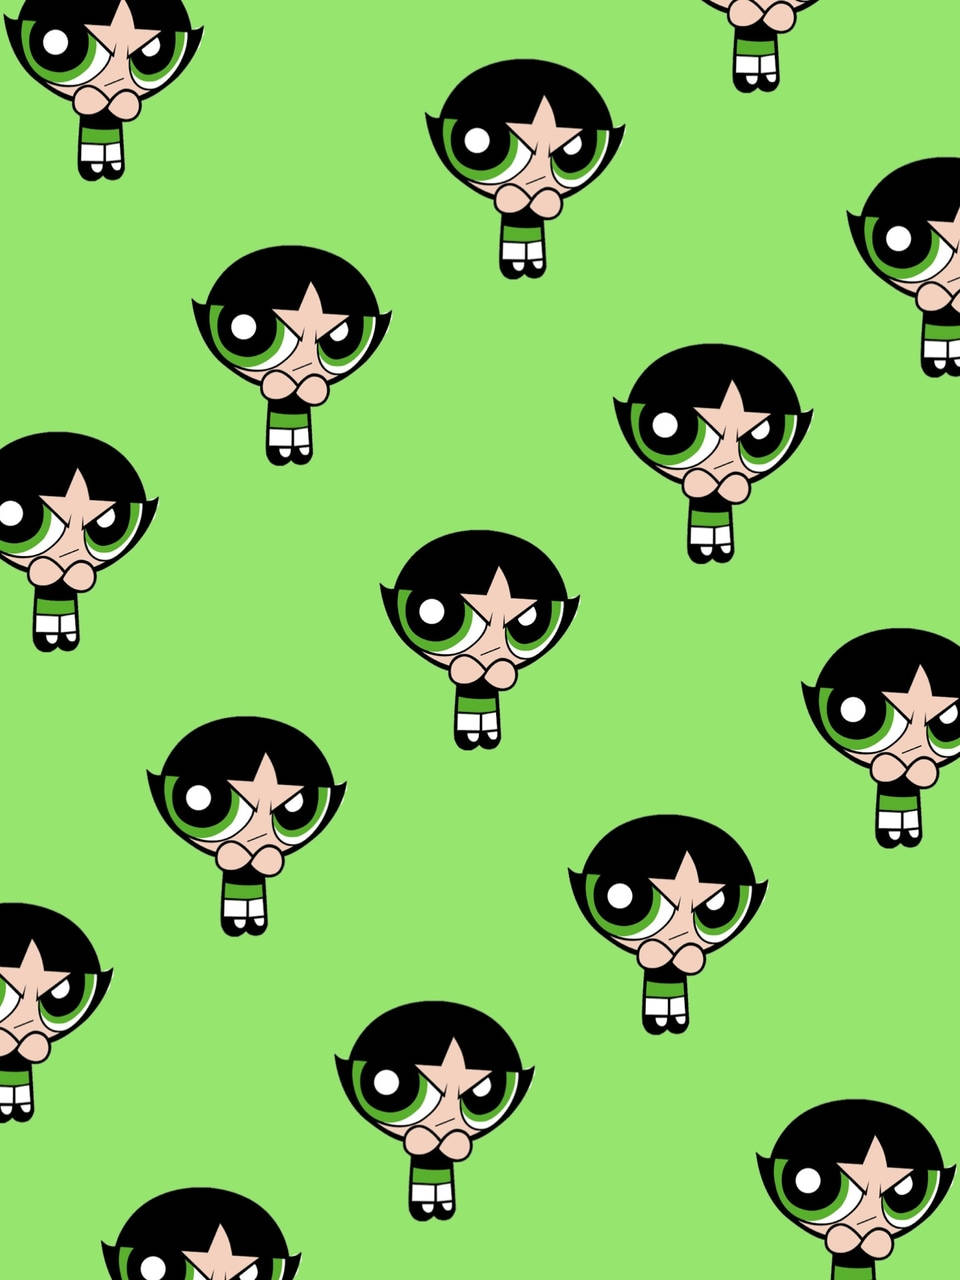 Come join the fun in the magical world of Buttercup! Wallpaper